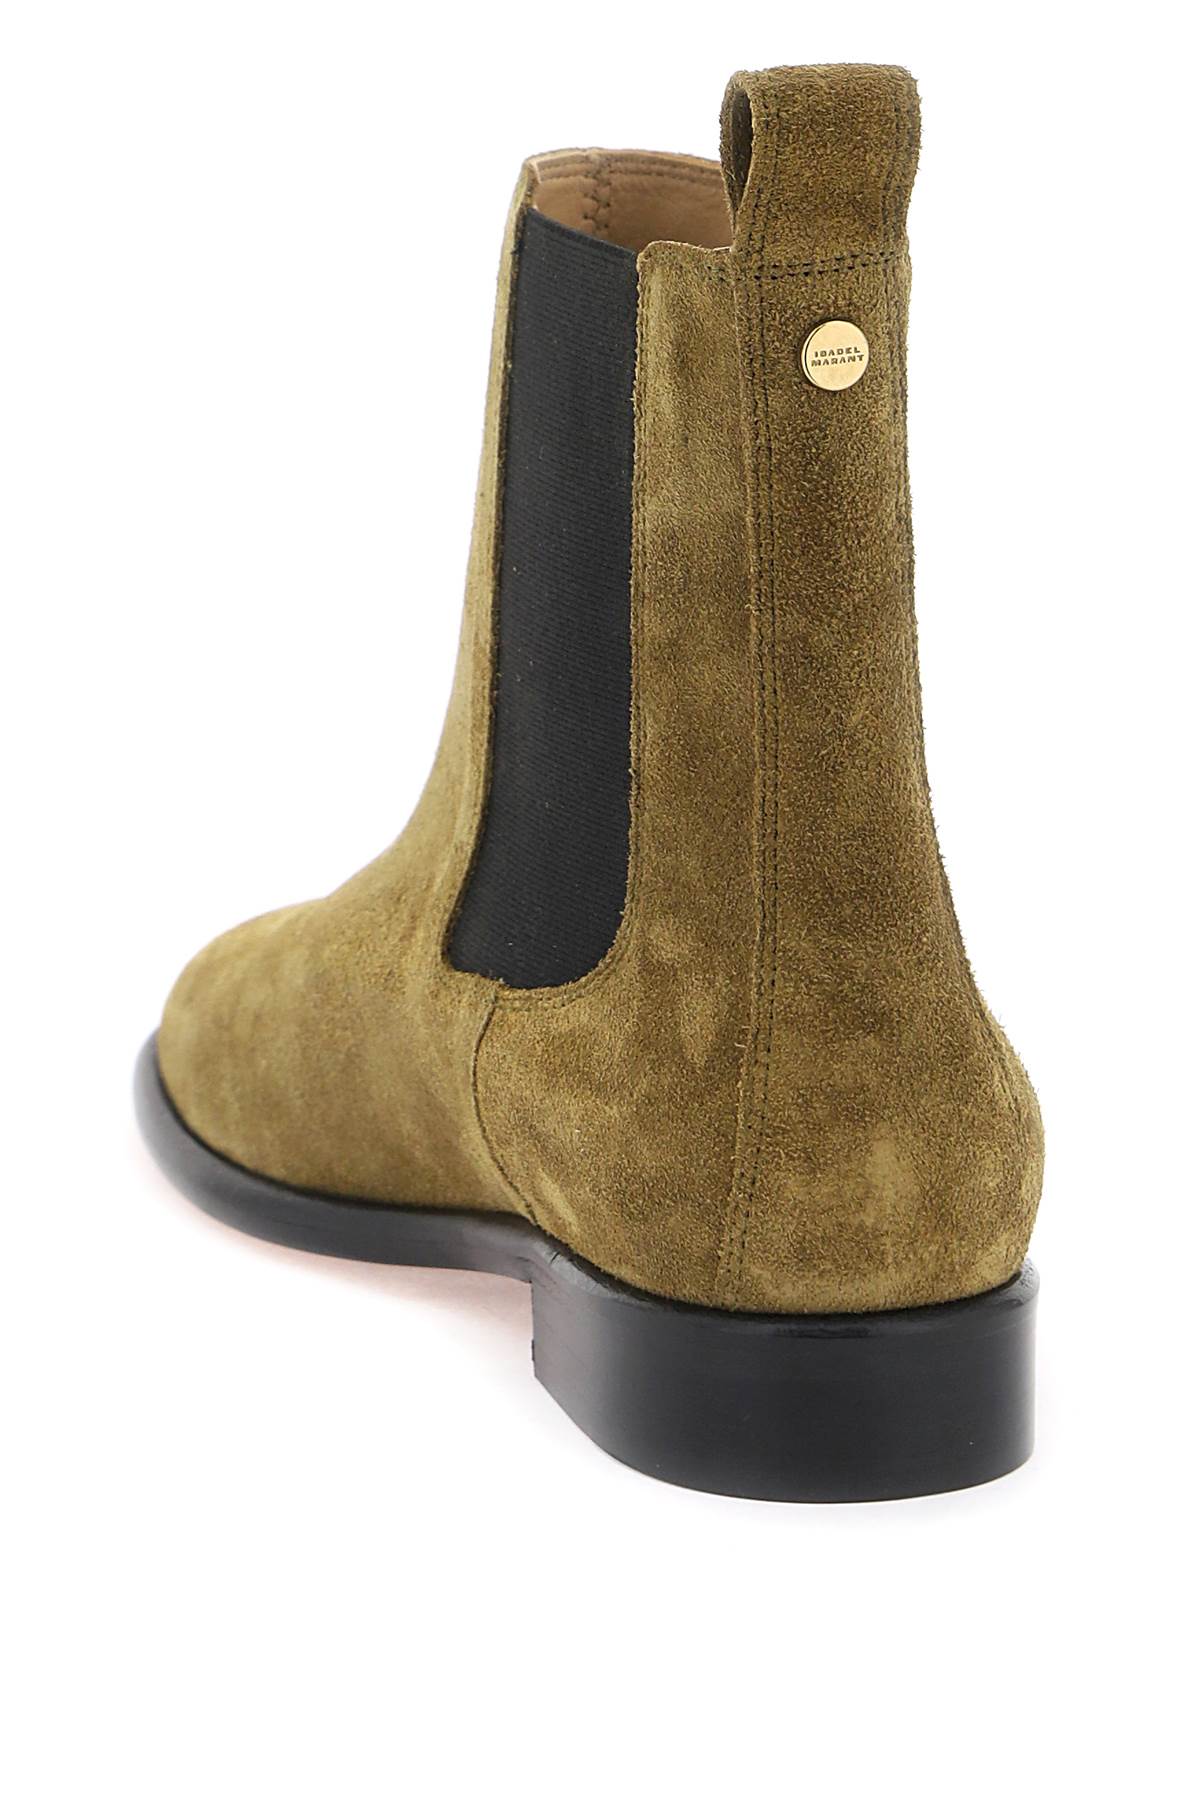 Isabel marant 'galna' ankle boots-2